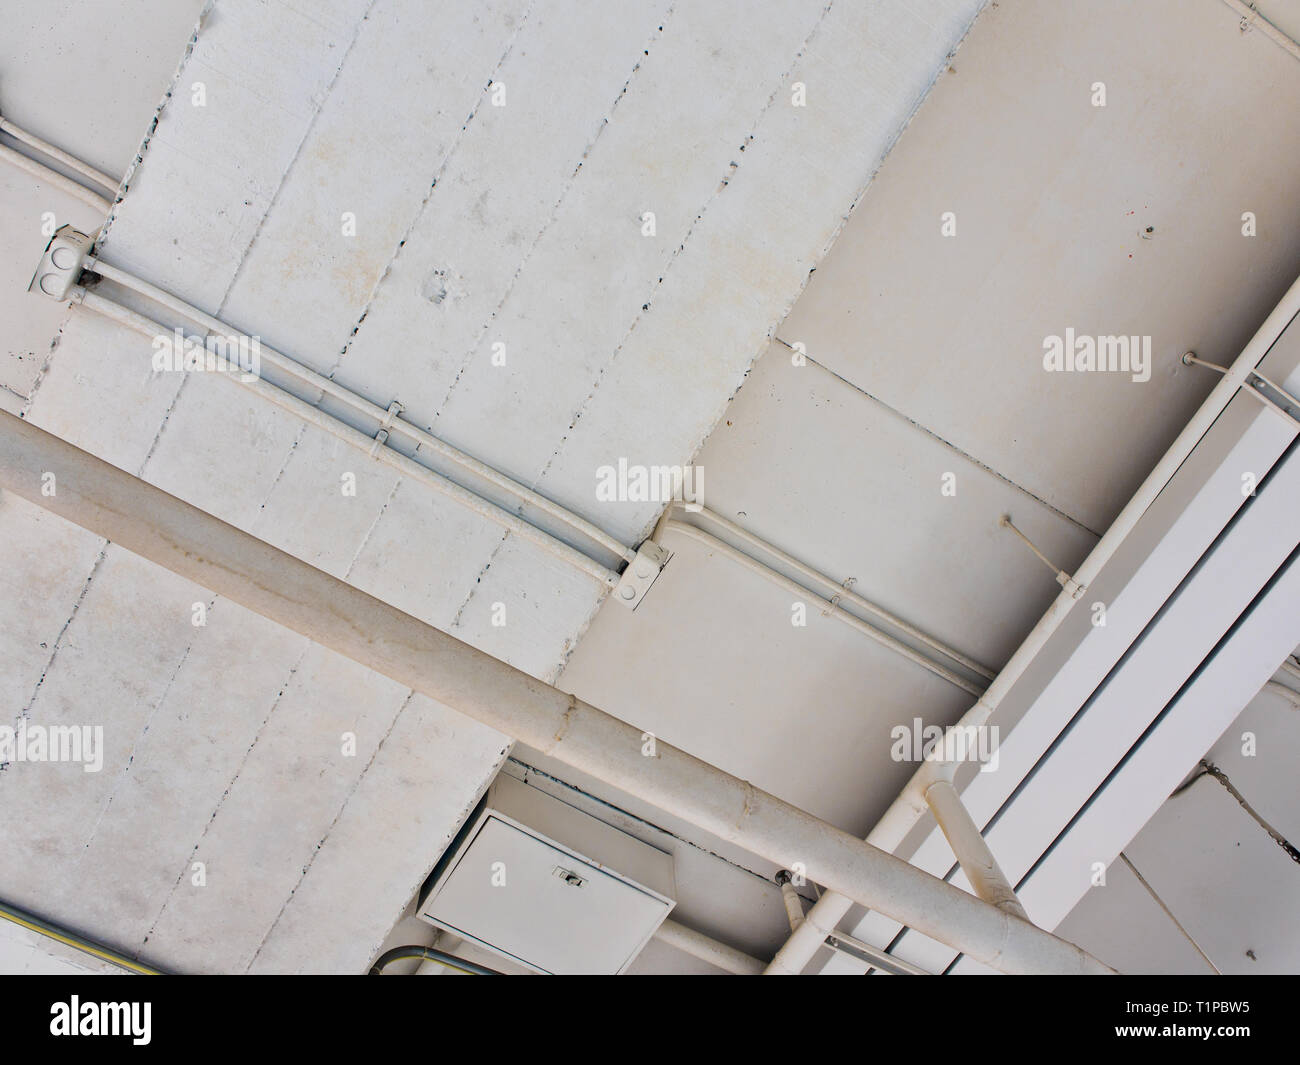 Cable Tray Stock Photos Cable Tray Stock Images Alamy